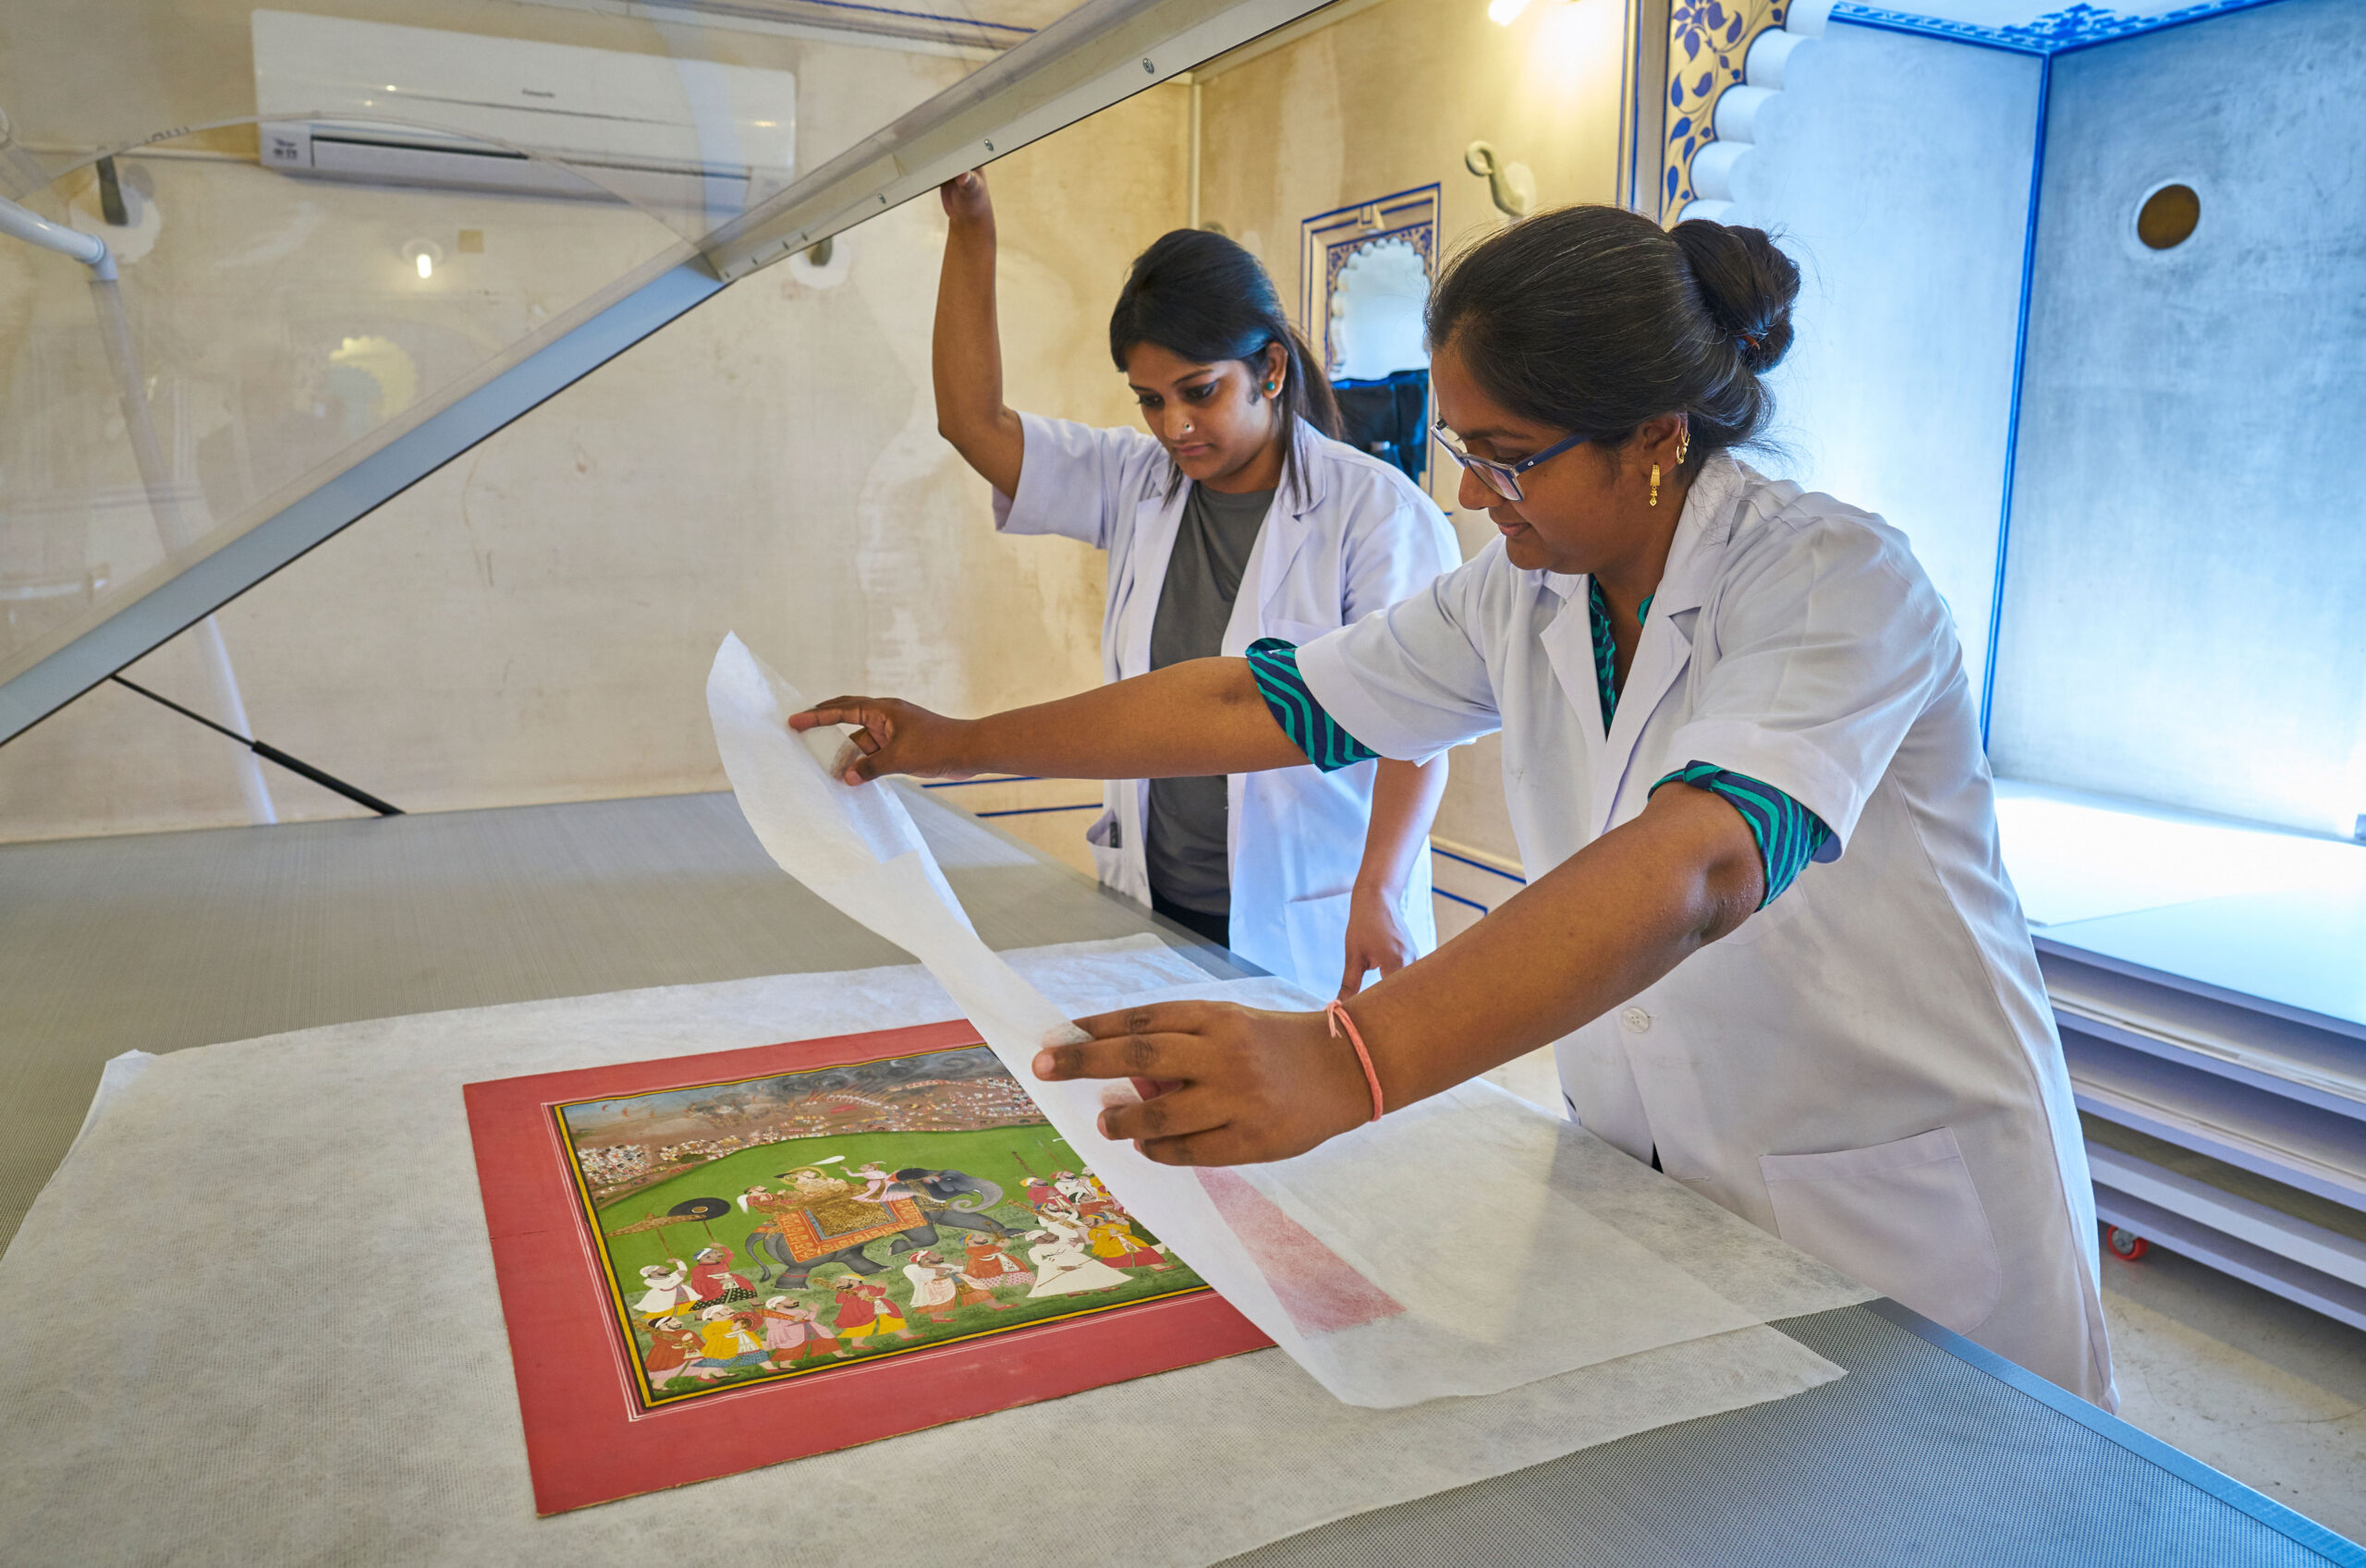 Suction table being used for treatment of paintings